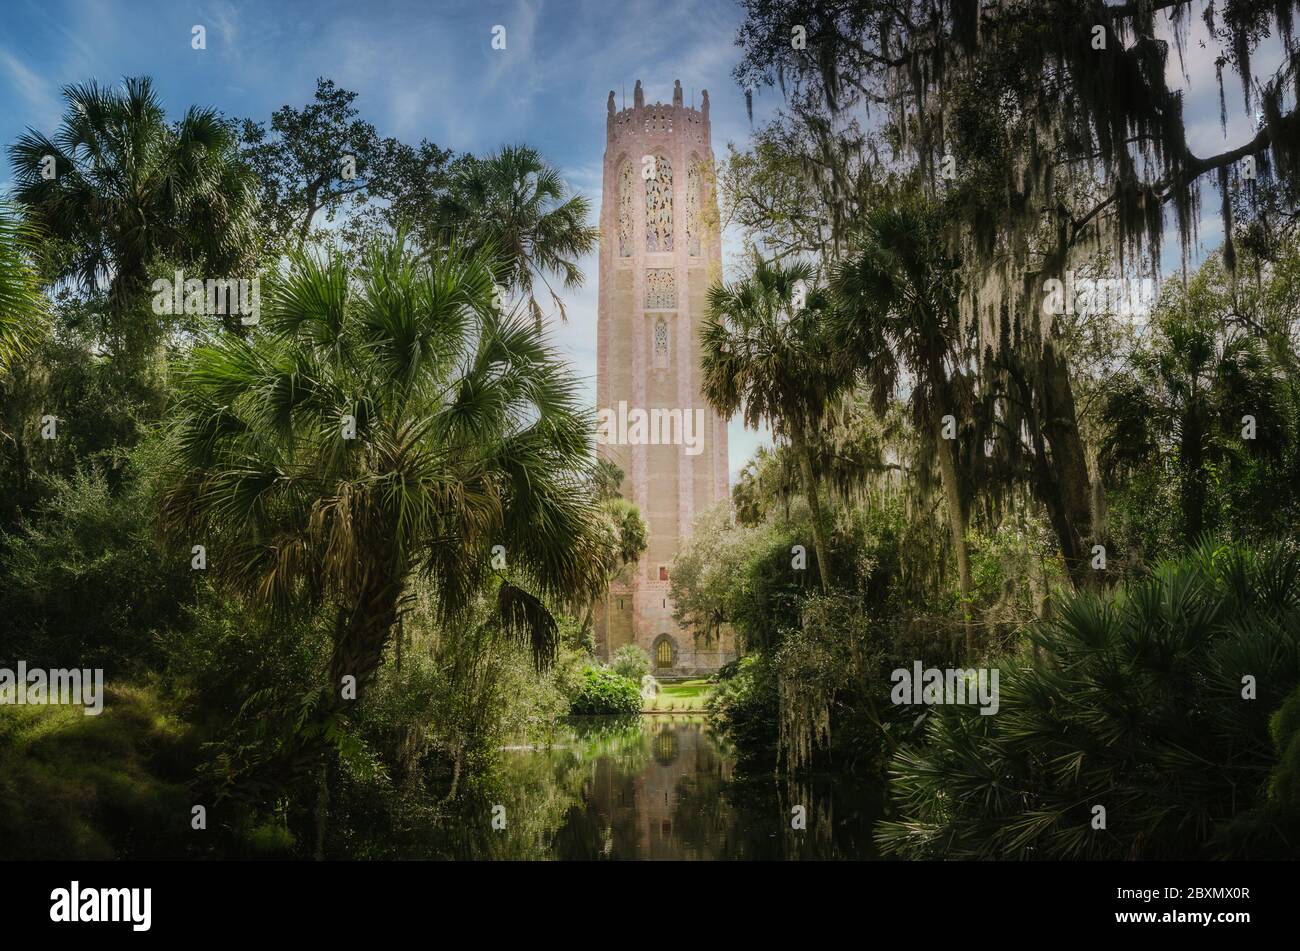 Singing Tower is built upon Iron Mountain, one of the highest points of Florida peninsular. It contains the 60-bell carillon set and the largest caril Stock Photo